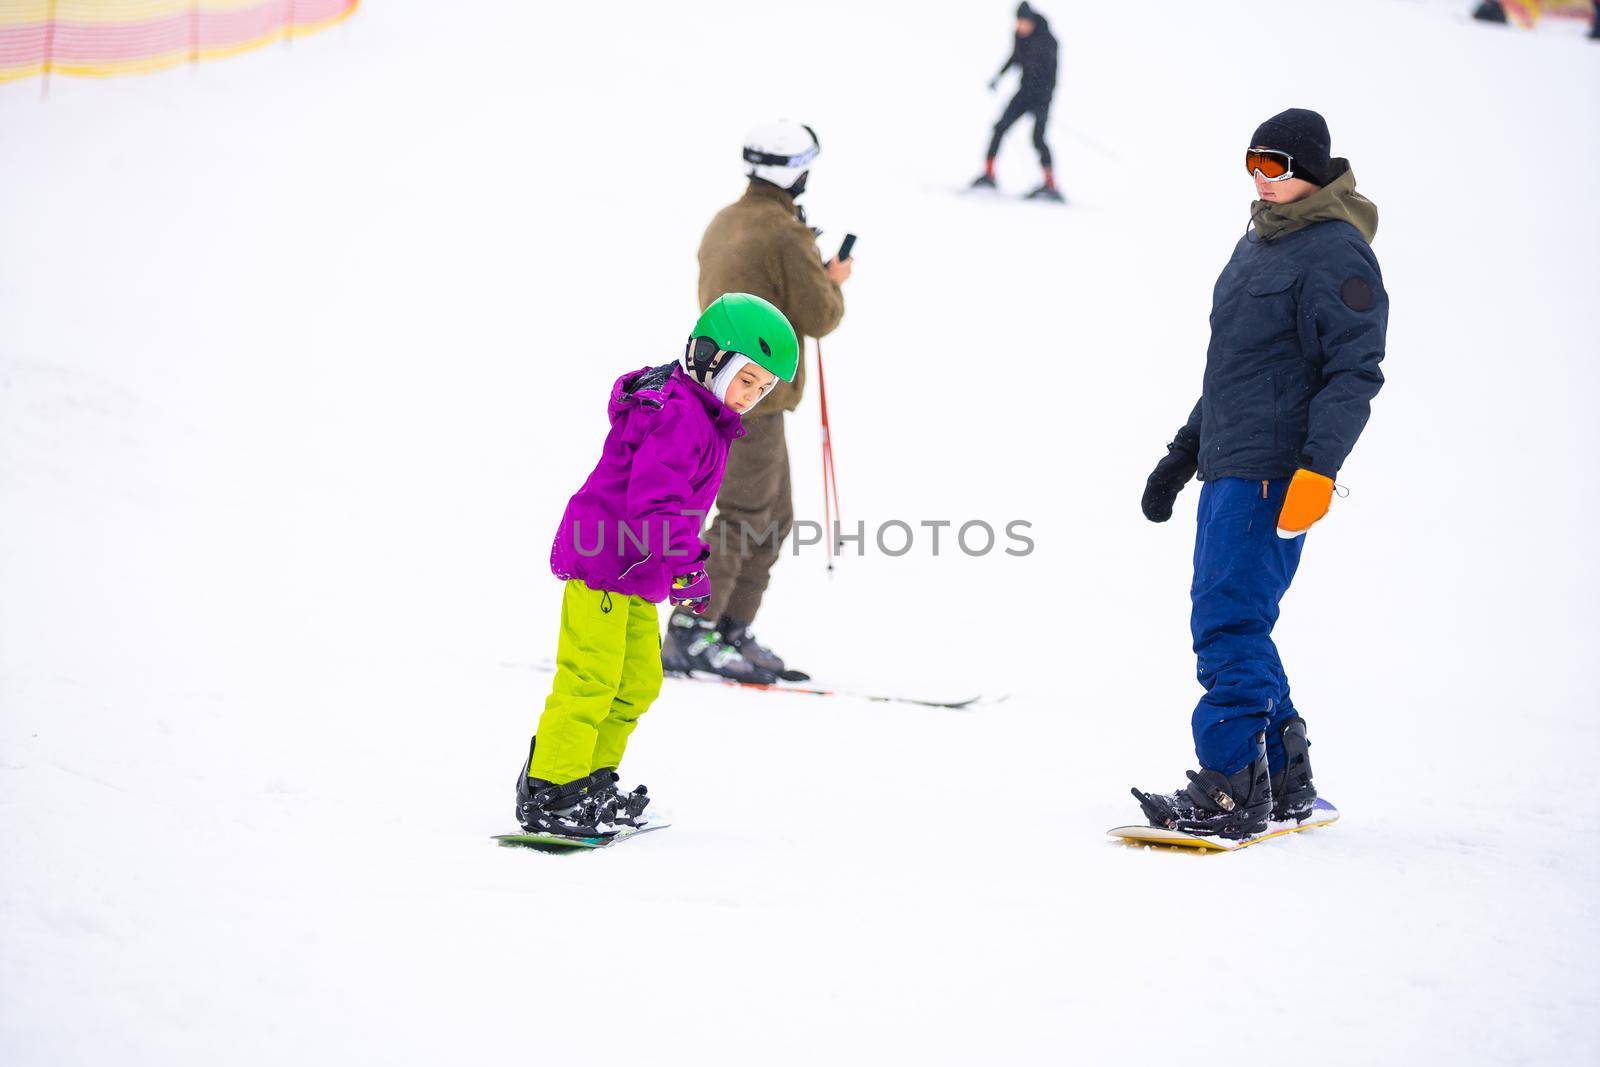 Snowboard Winter Sport. little girl learning to snowboard, wearing warm winter clothes. Winter background. by Andelov13